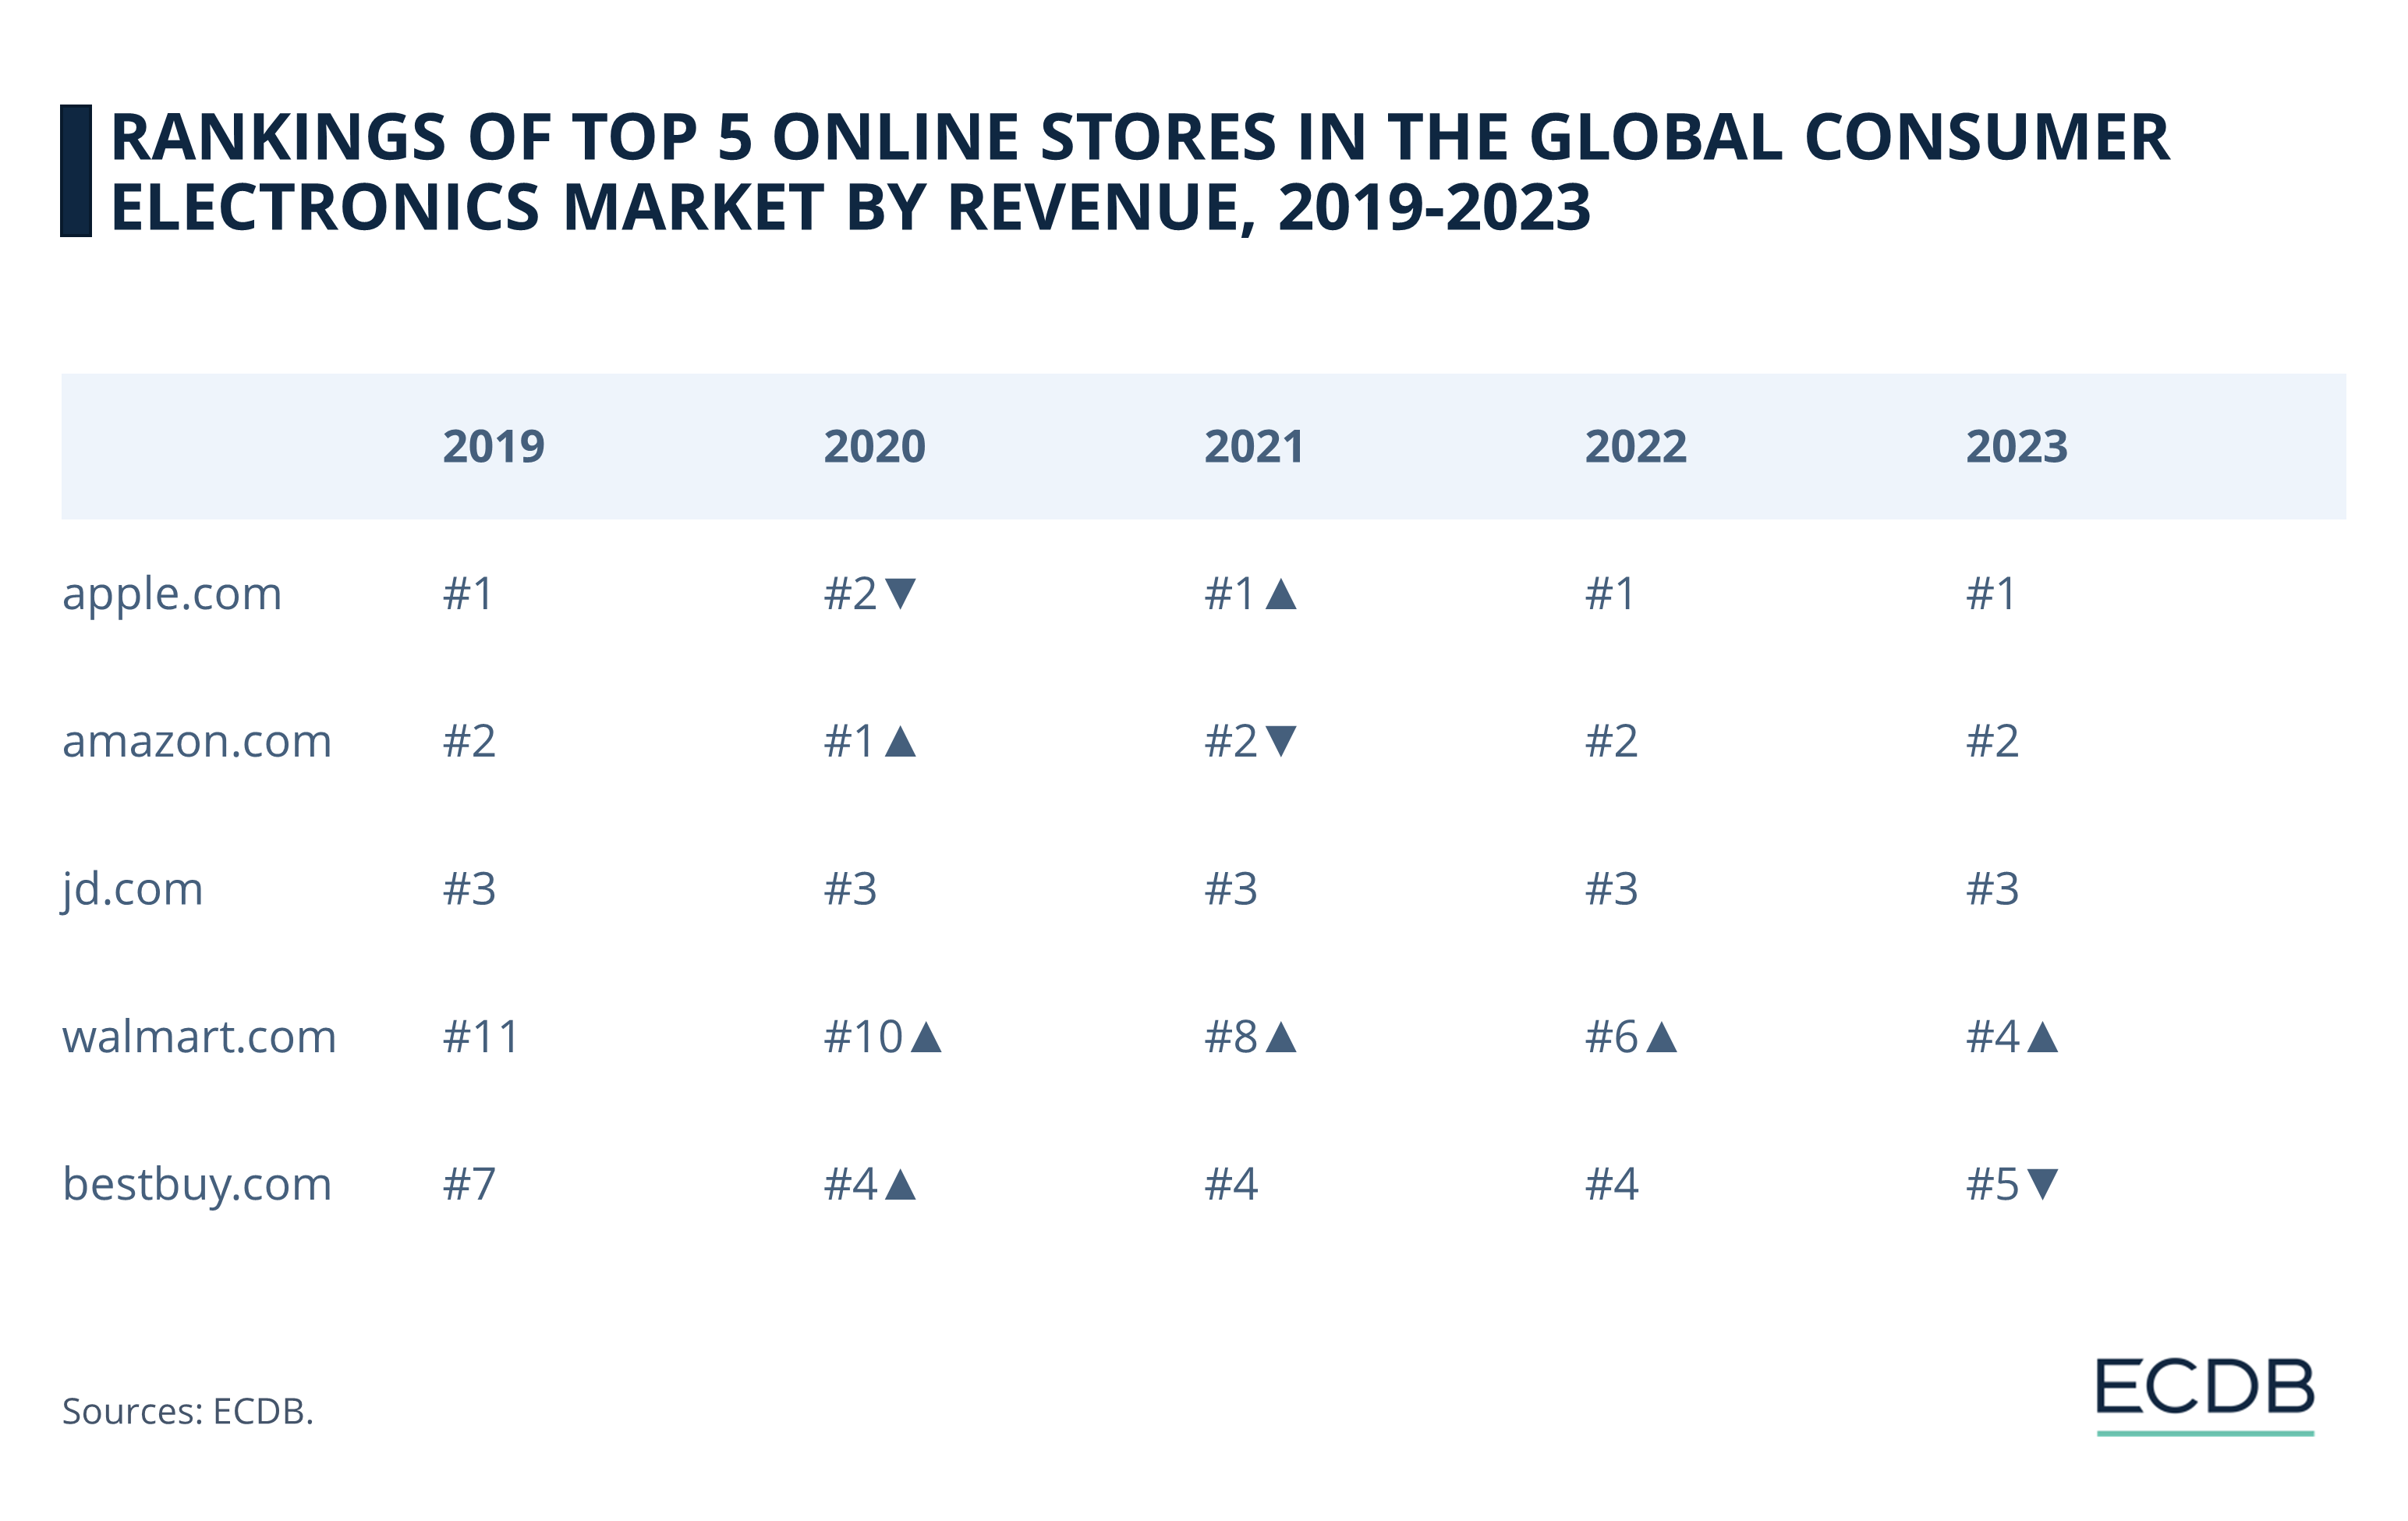 Rankings of Top 5 Online Stores in the Global Consumer Electronics Market by Revenue, 2019-2023